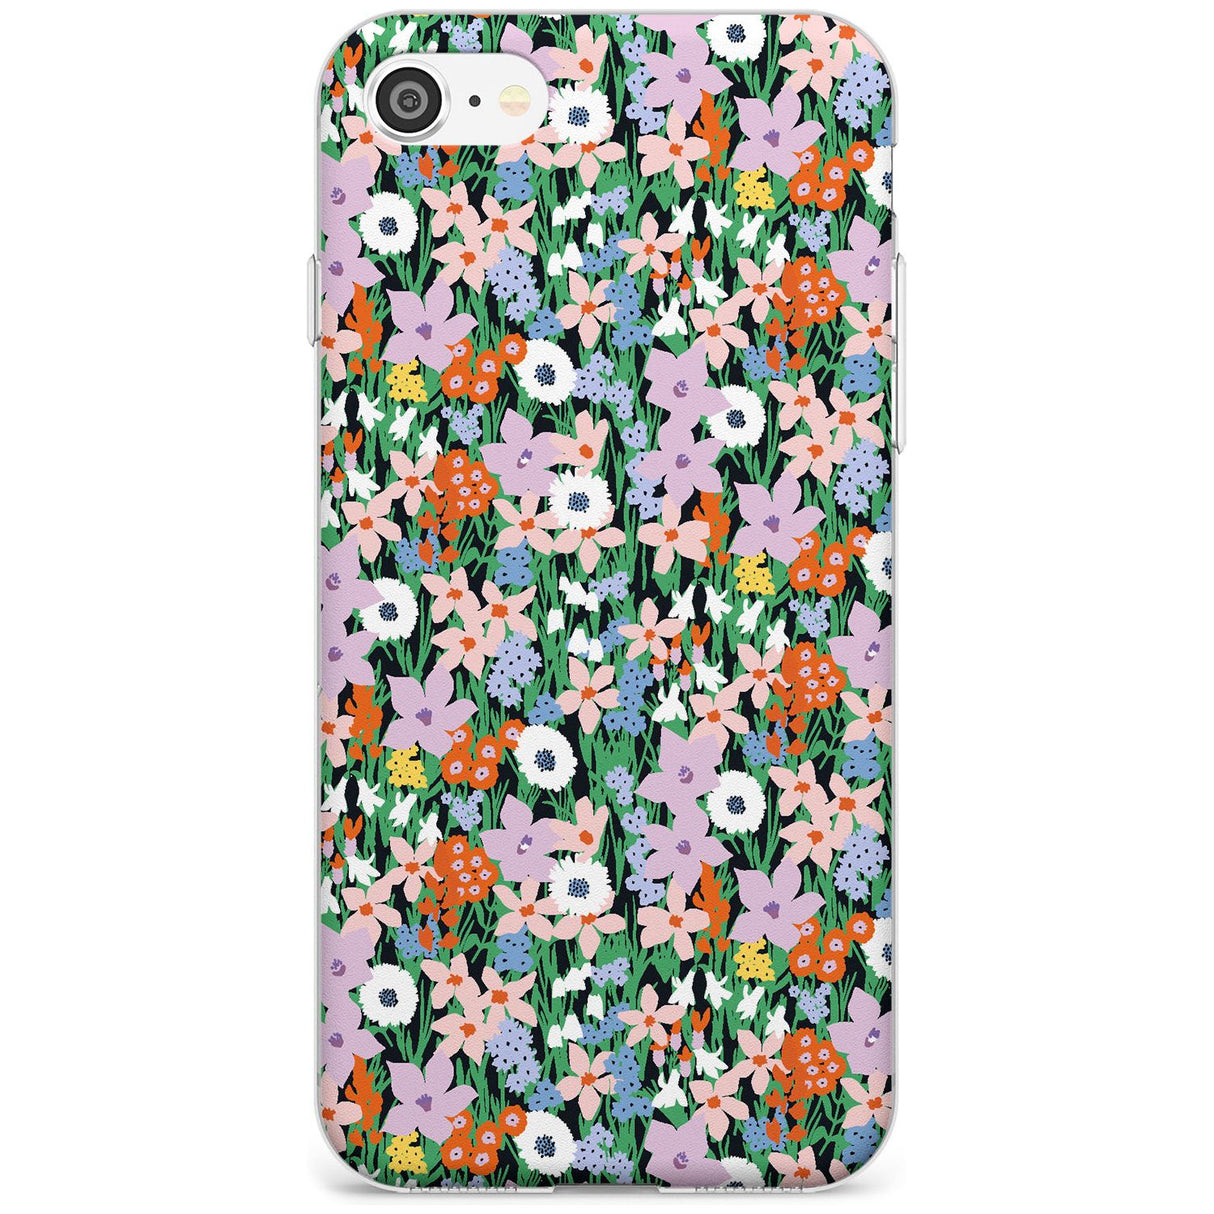 Jazzy Floral Mix: Solid Black Impact Phone Case for iPhone SE 8 7 Plus